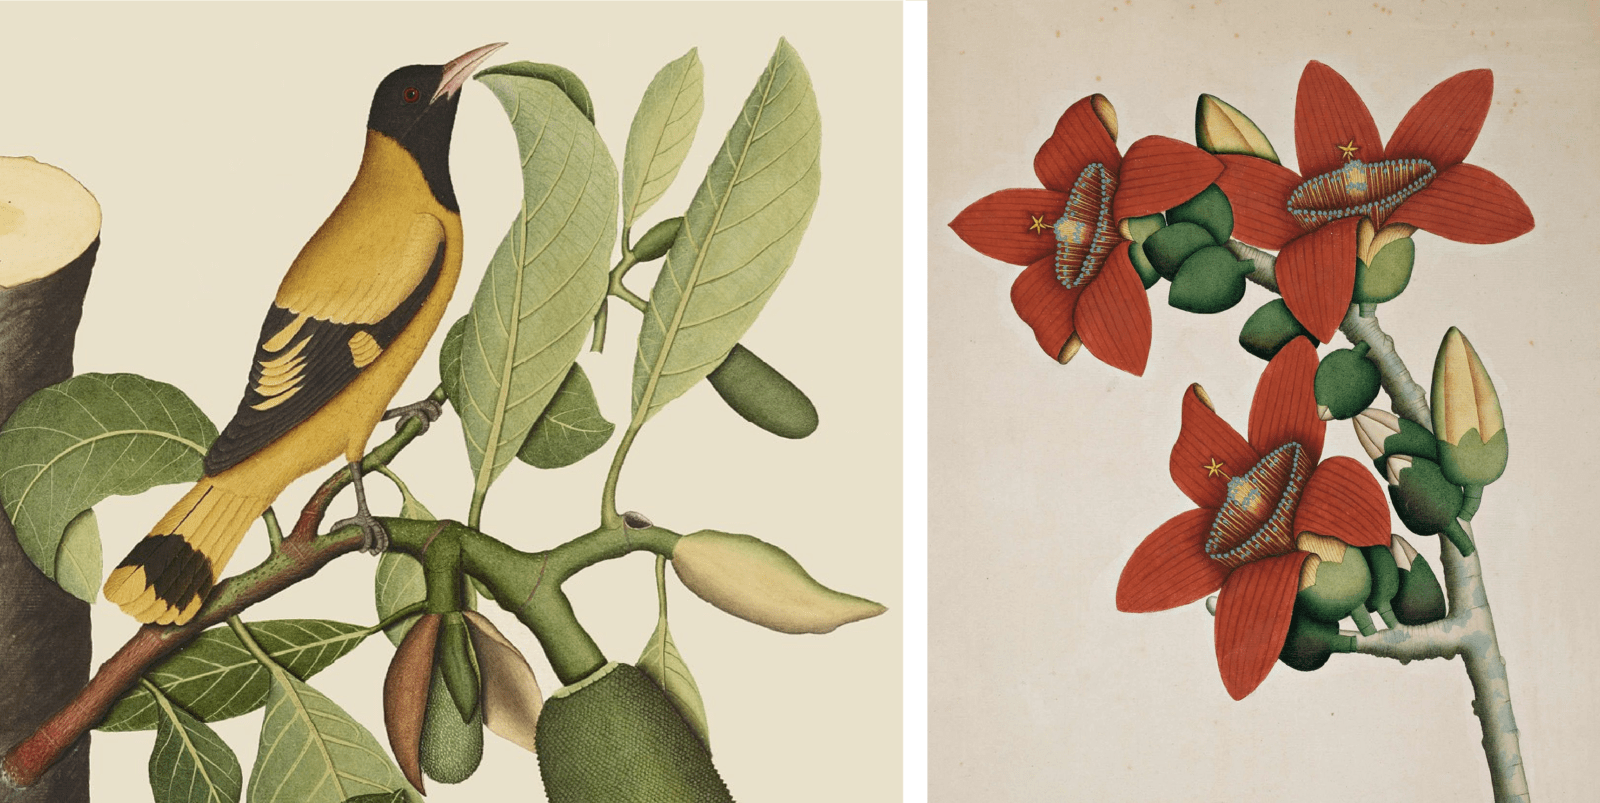 flora and fauna of India made Indian artists felicitously called as the "Forgotten Masters"